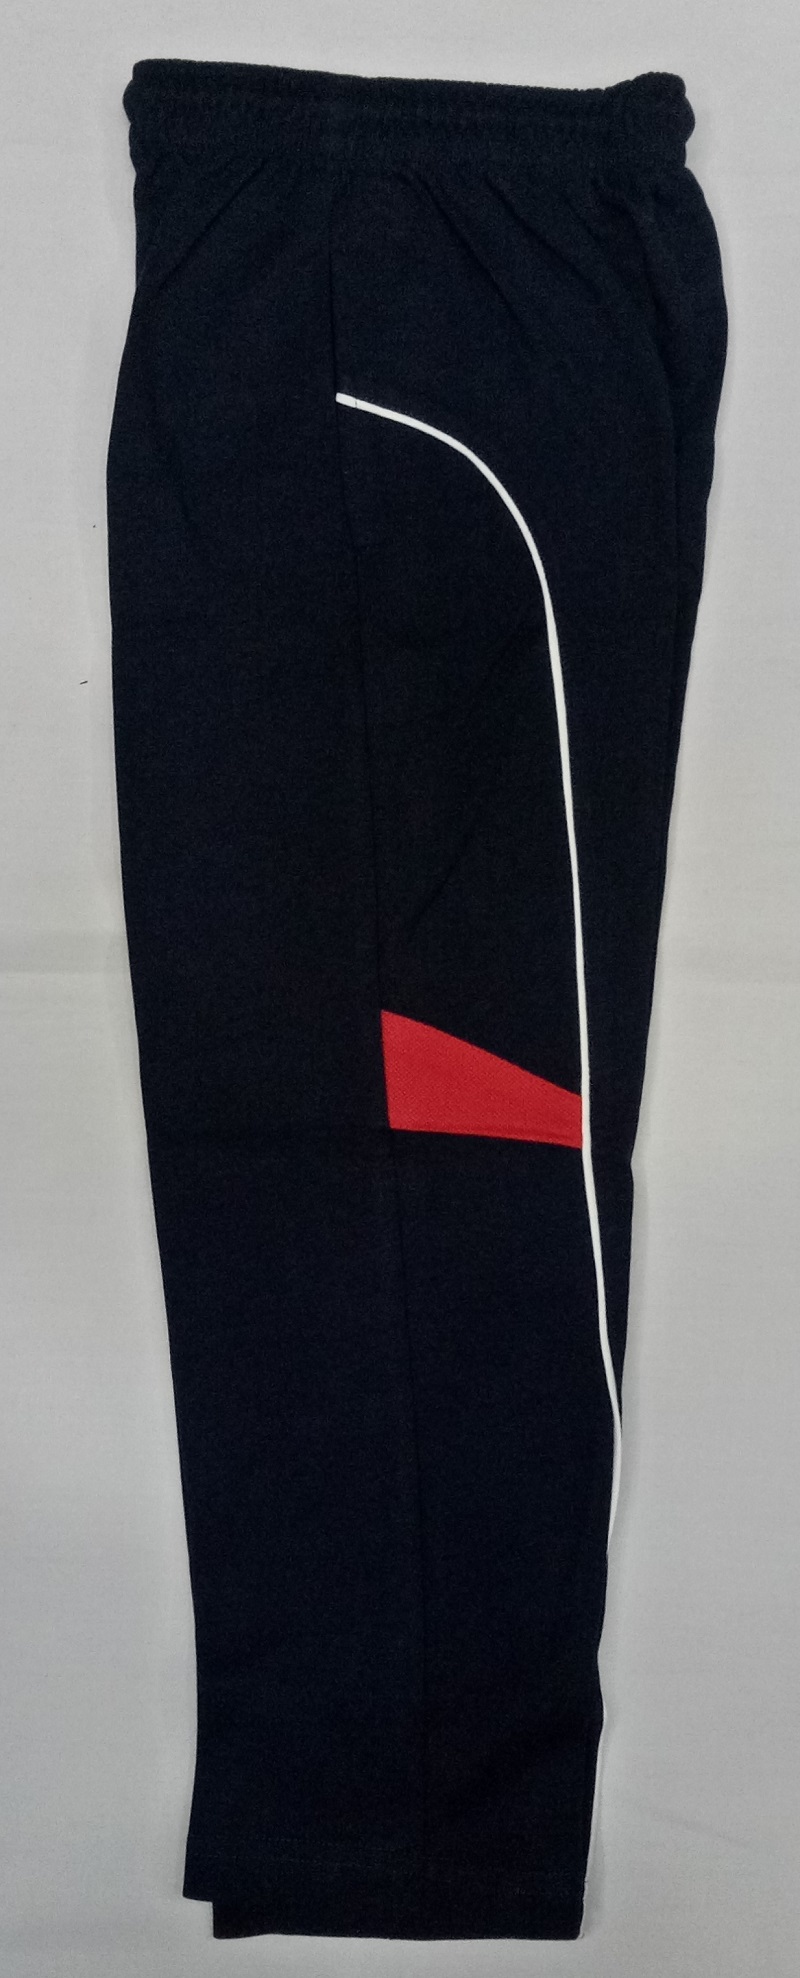 TRACK PANT - LINCON HOUSE (RED)